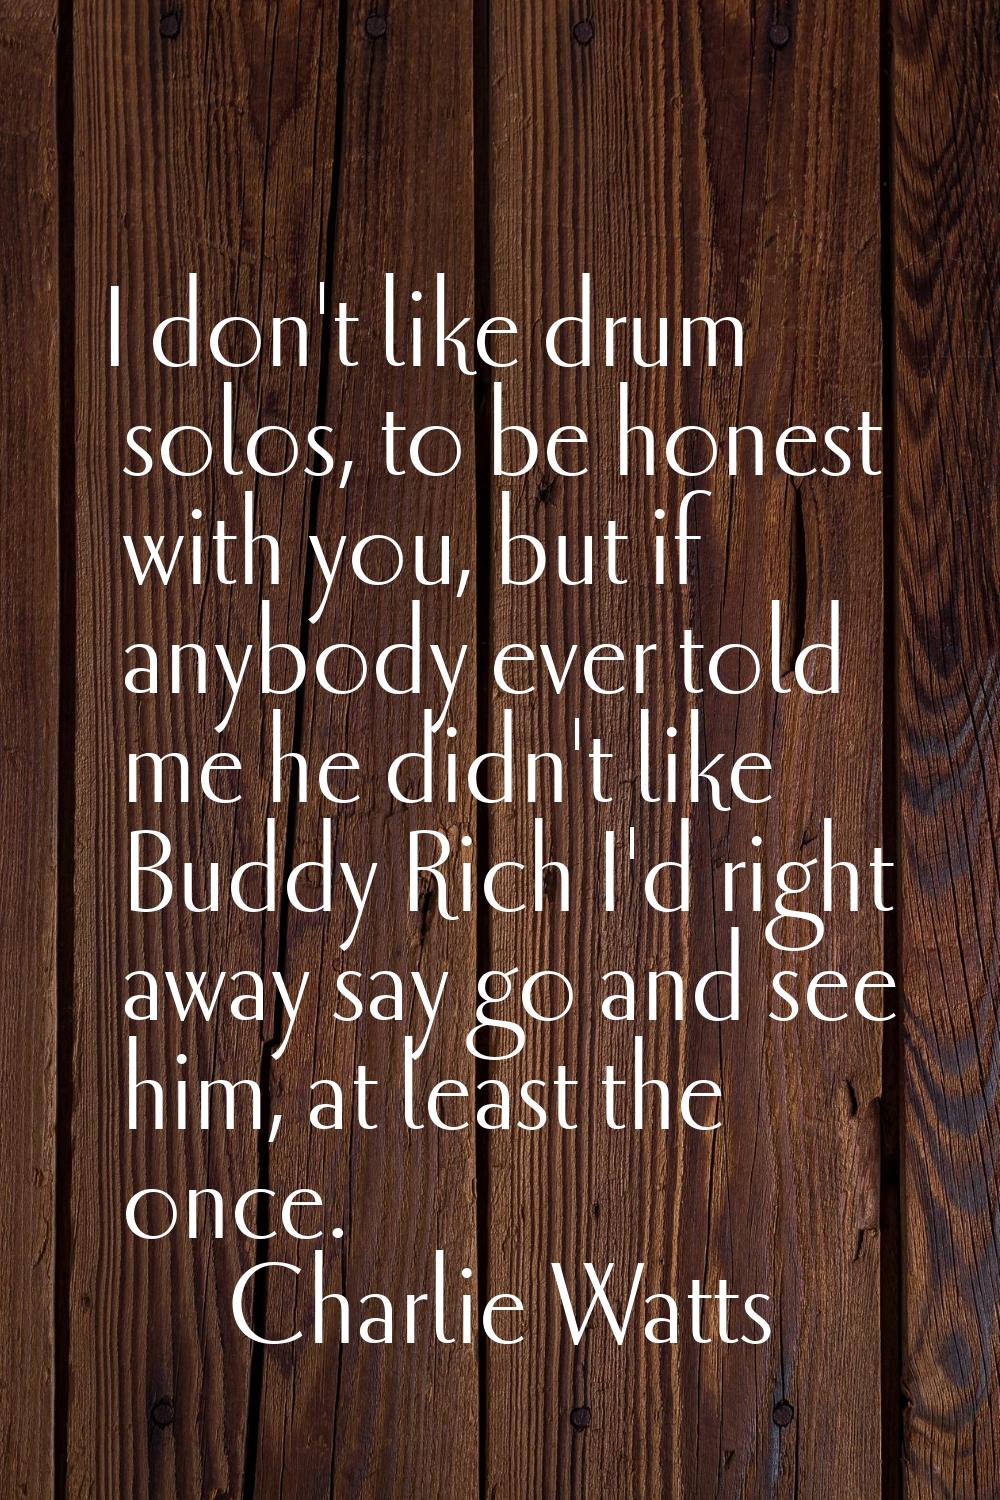 I don't like drum solos, to be honest with you, but if anybody ever told me he didn't like Buddy Ri